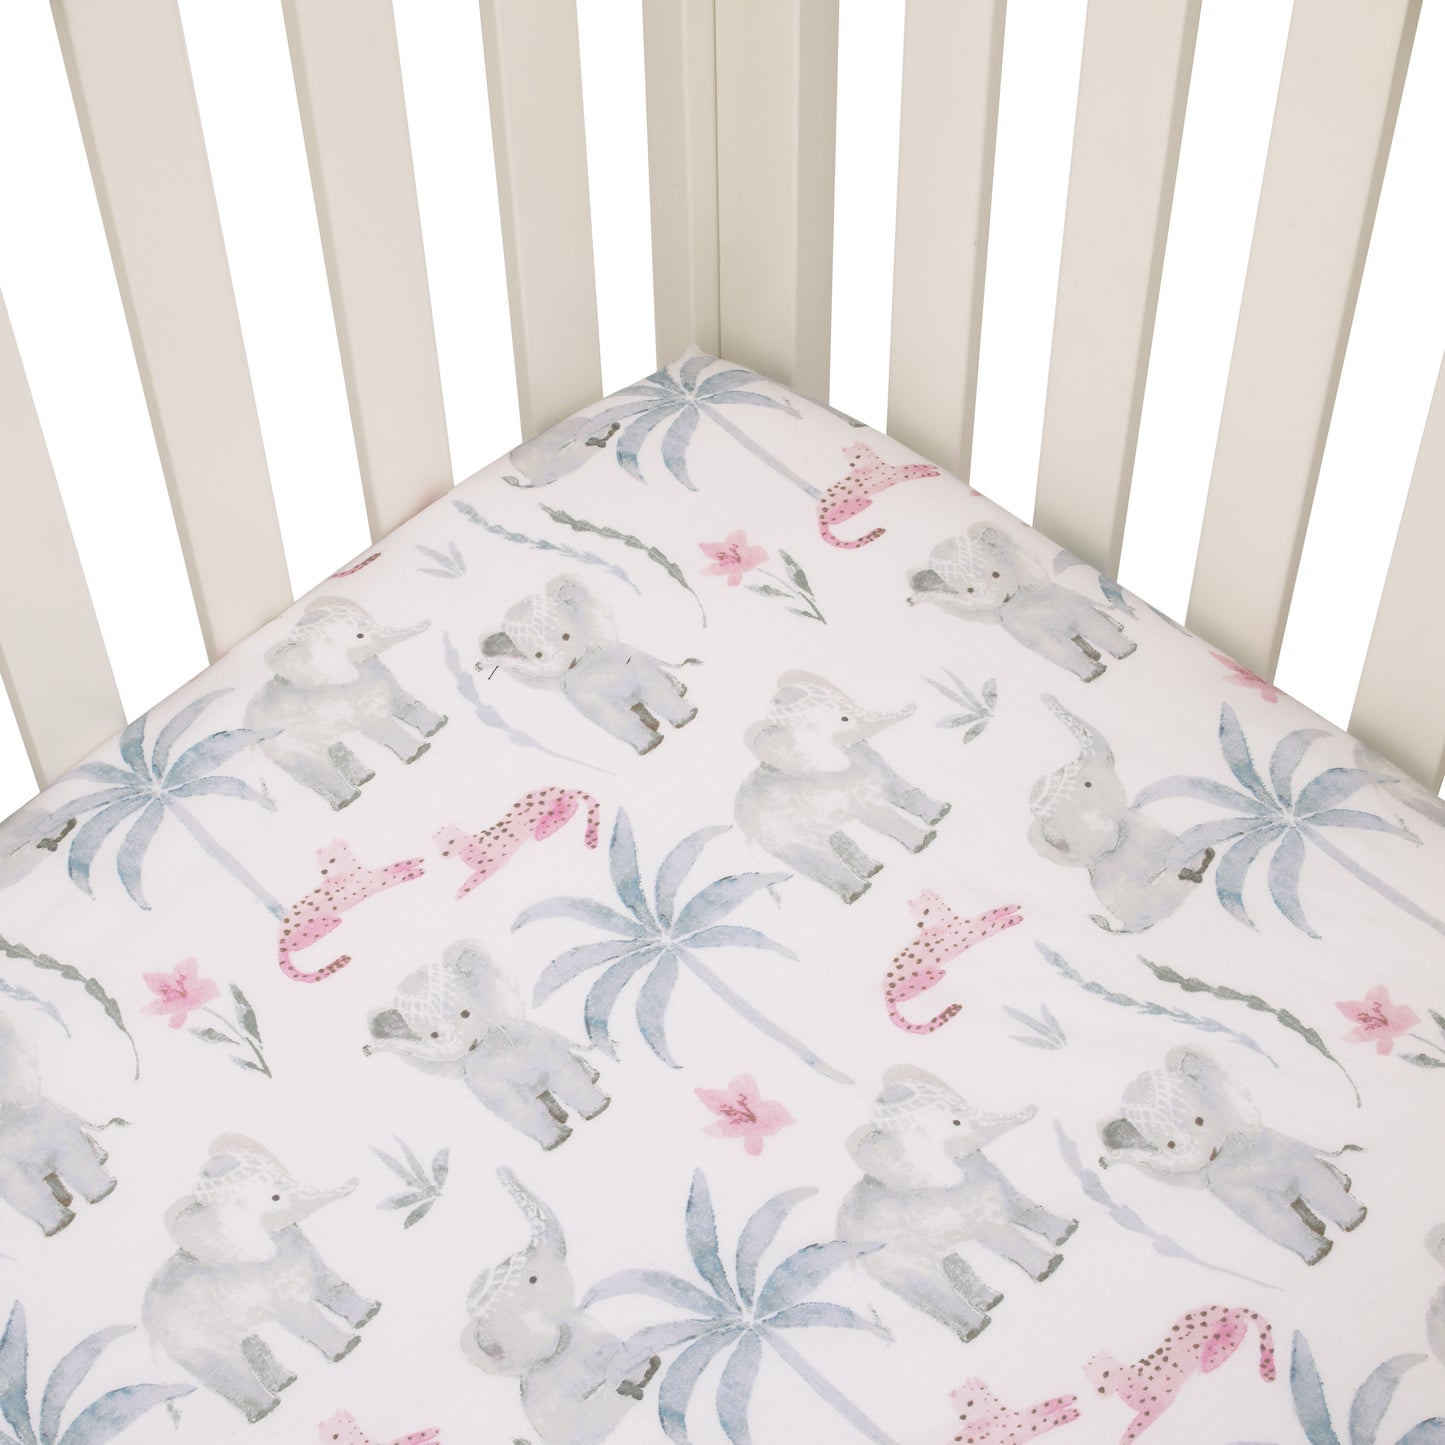 NoJo Tropical Princess Elephant/Jungle Pink and Green 100% Cotton Fitted Crib Sheet